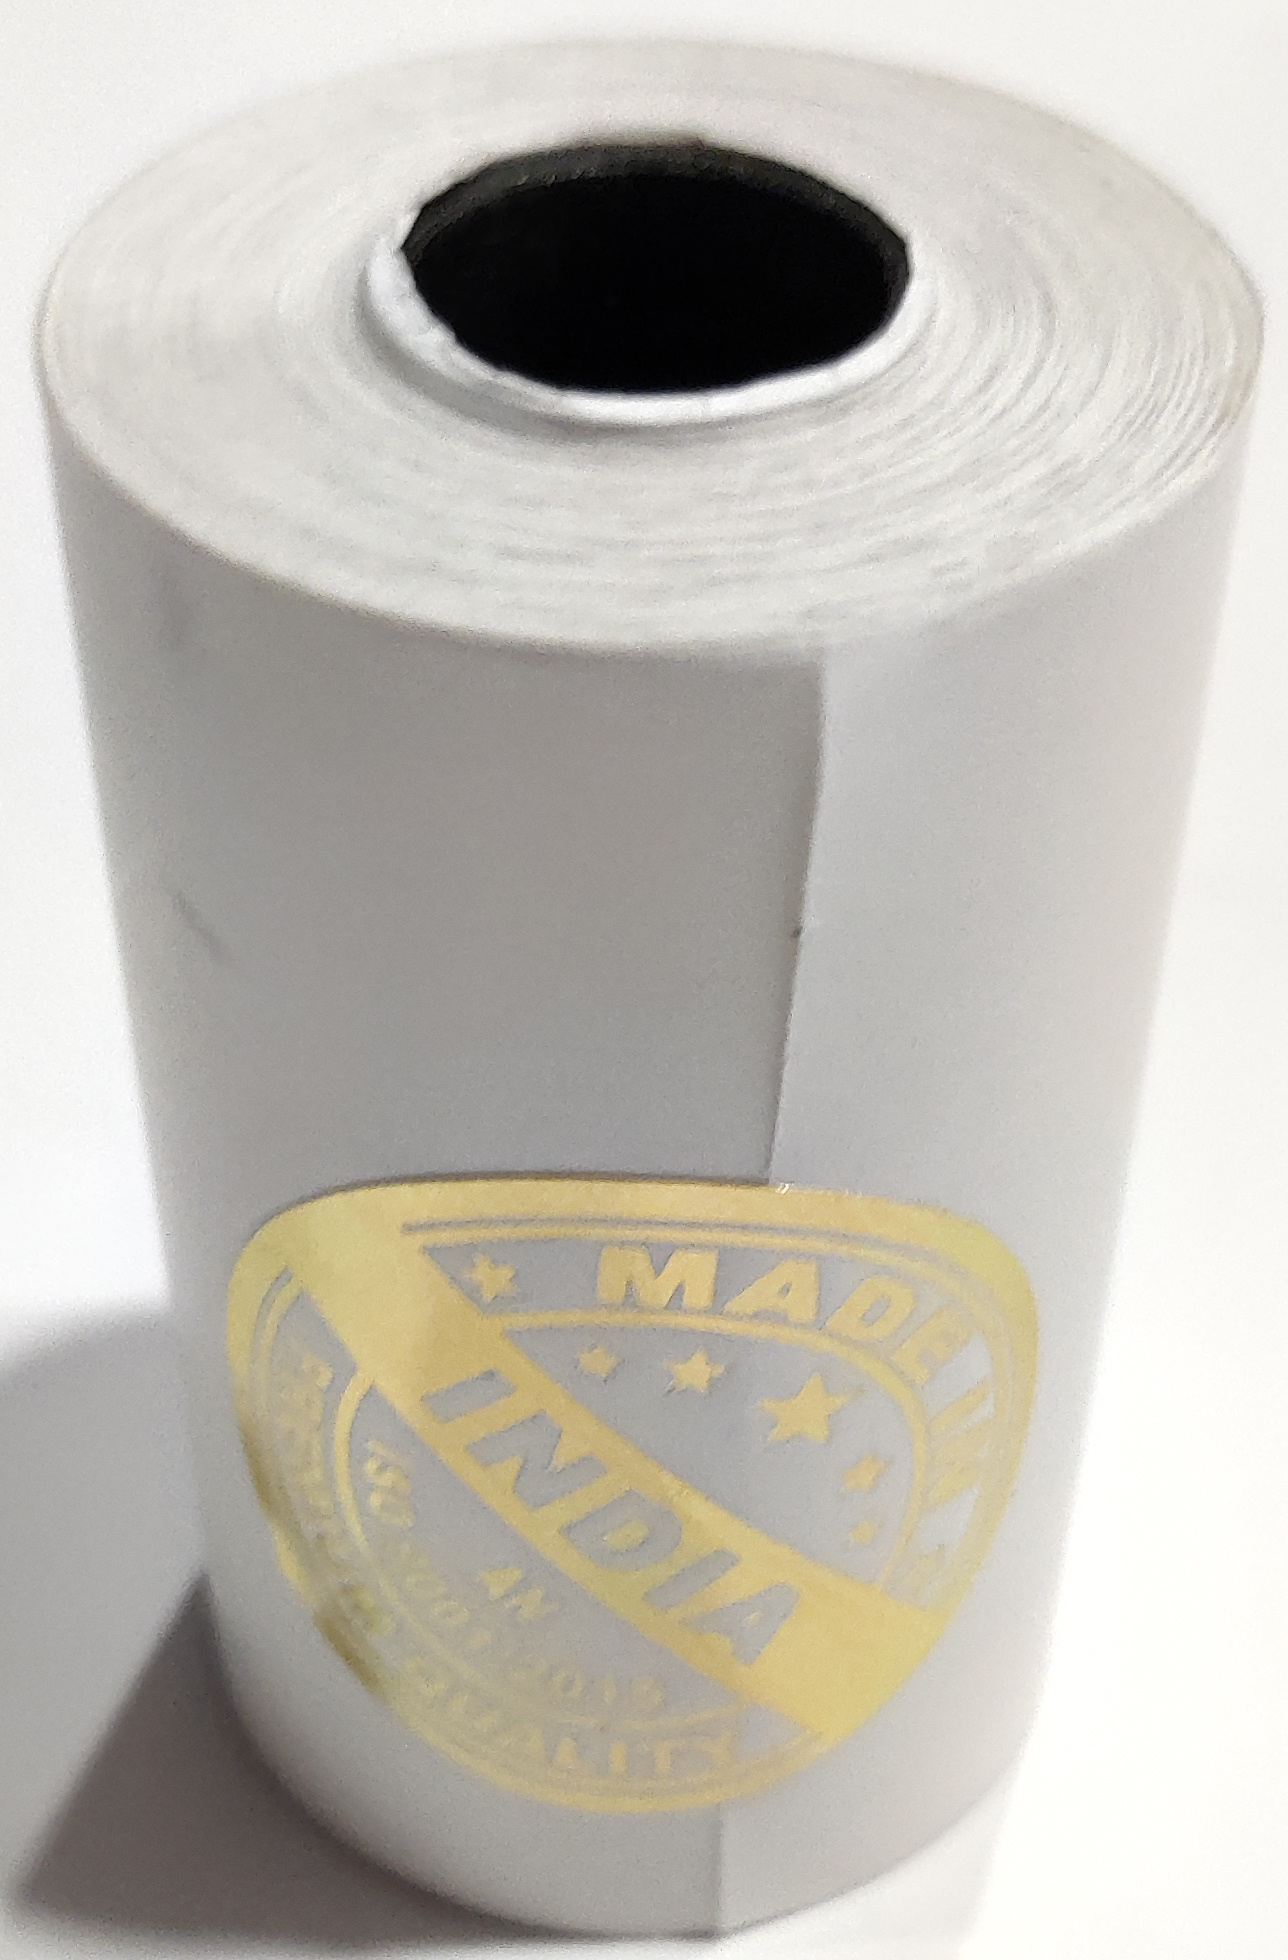 79mm X 20mtr(Plain) 72gsm Thermal Paper Roll